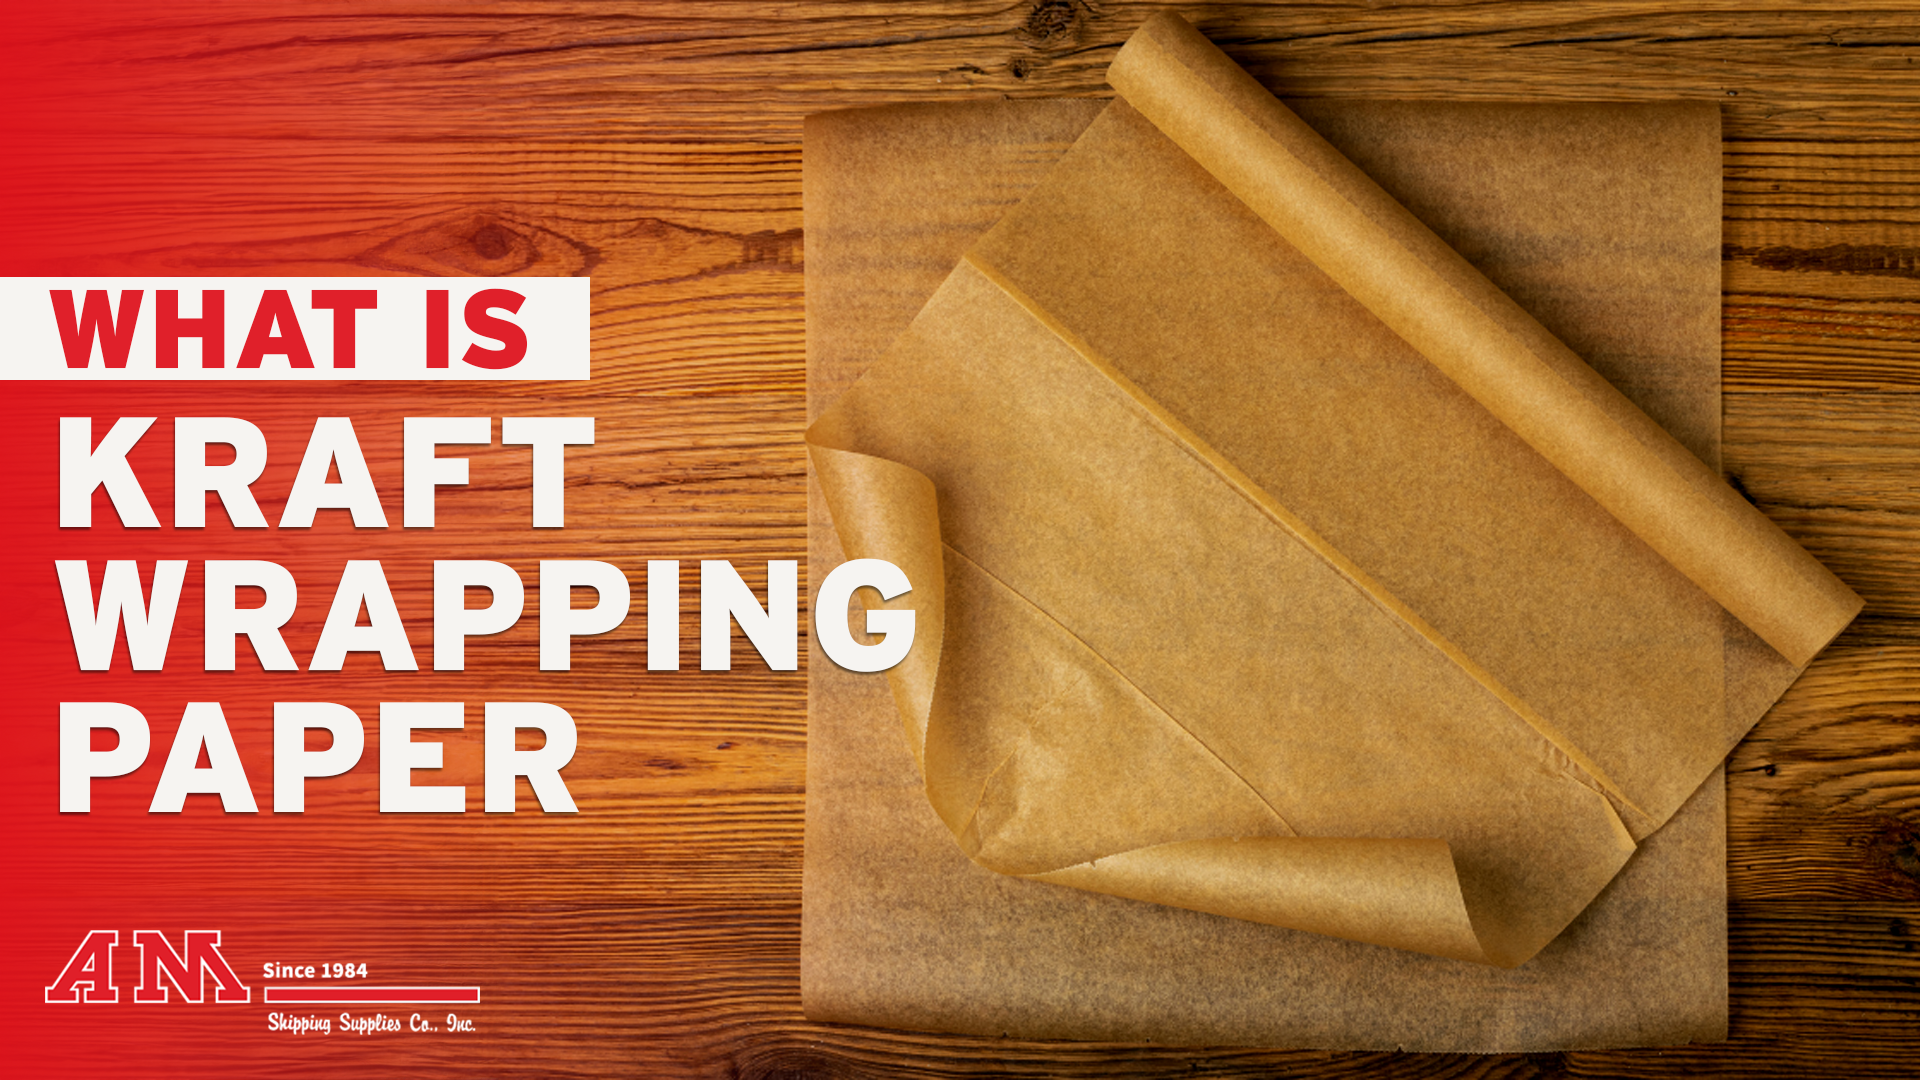 What is Kraft Wrapping Paper?